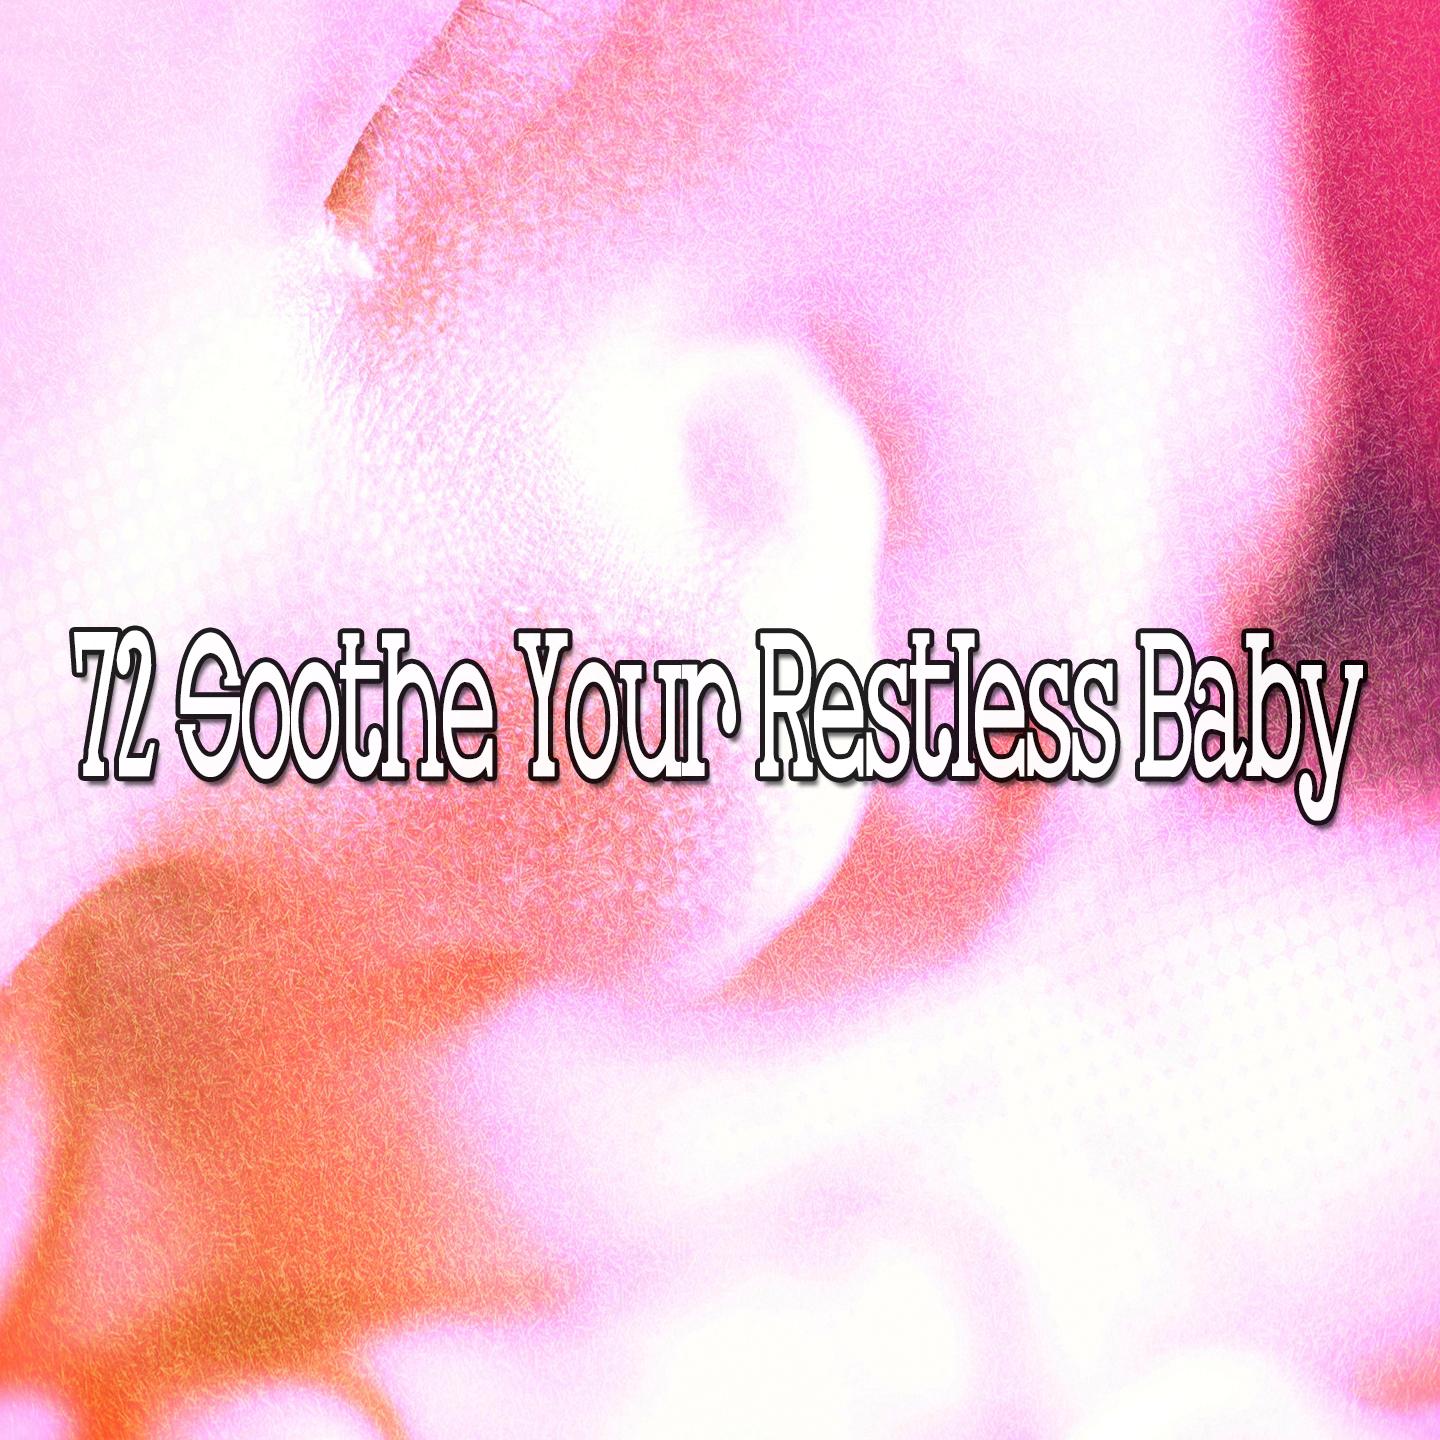 72 Soothe Your Restless Baby